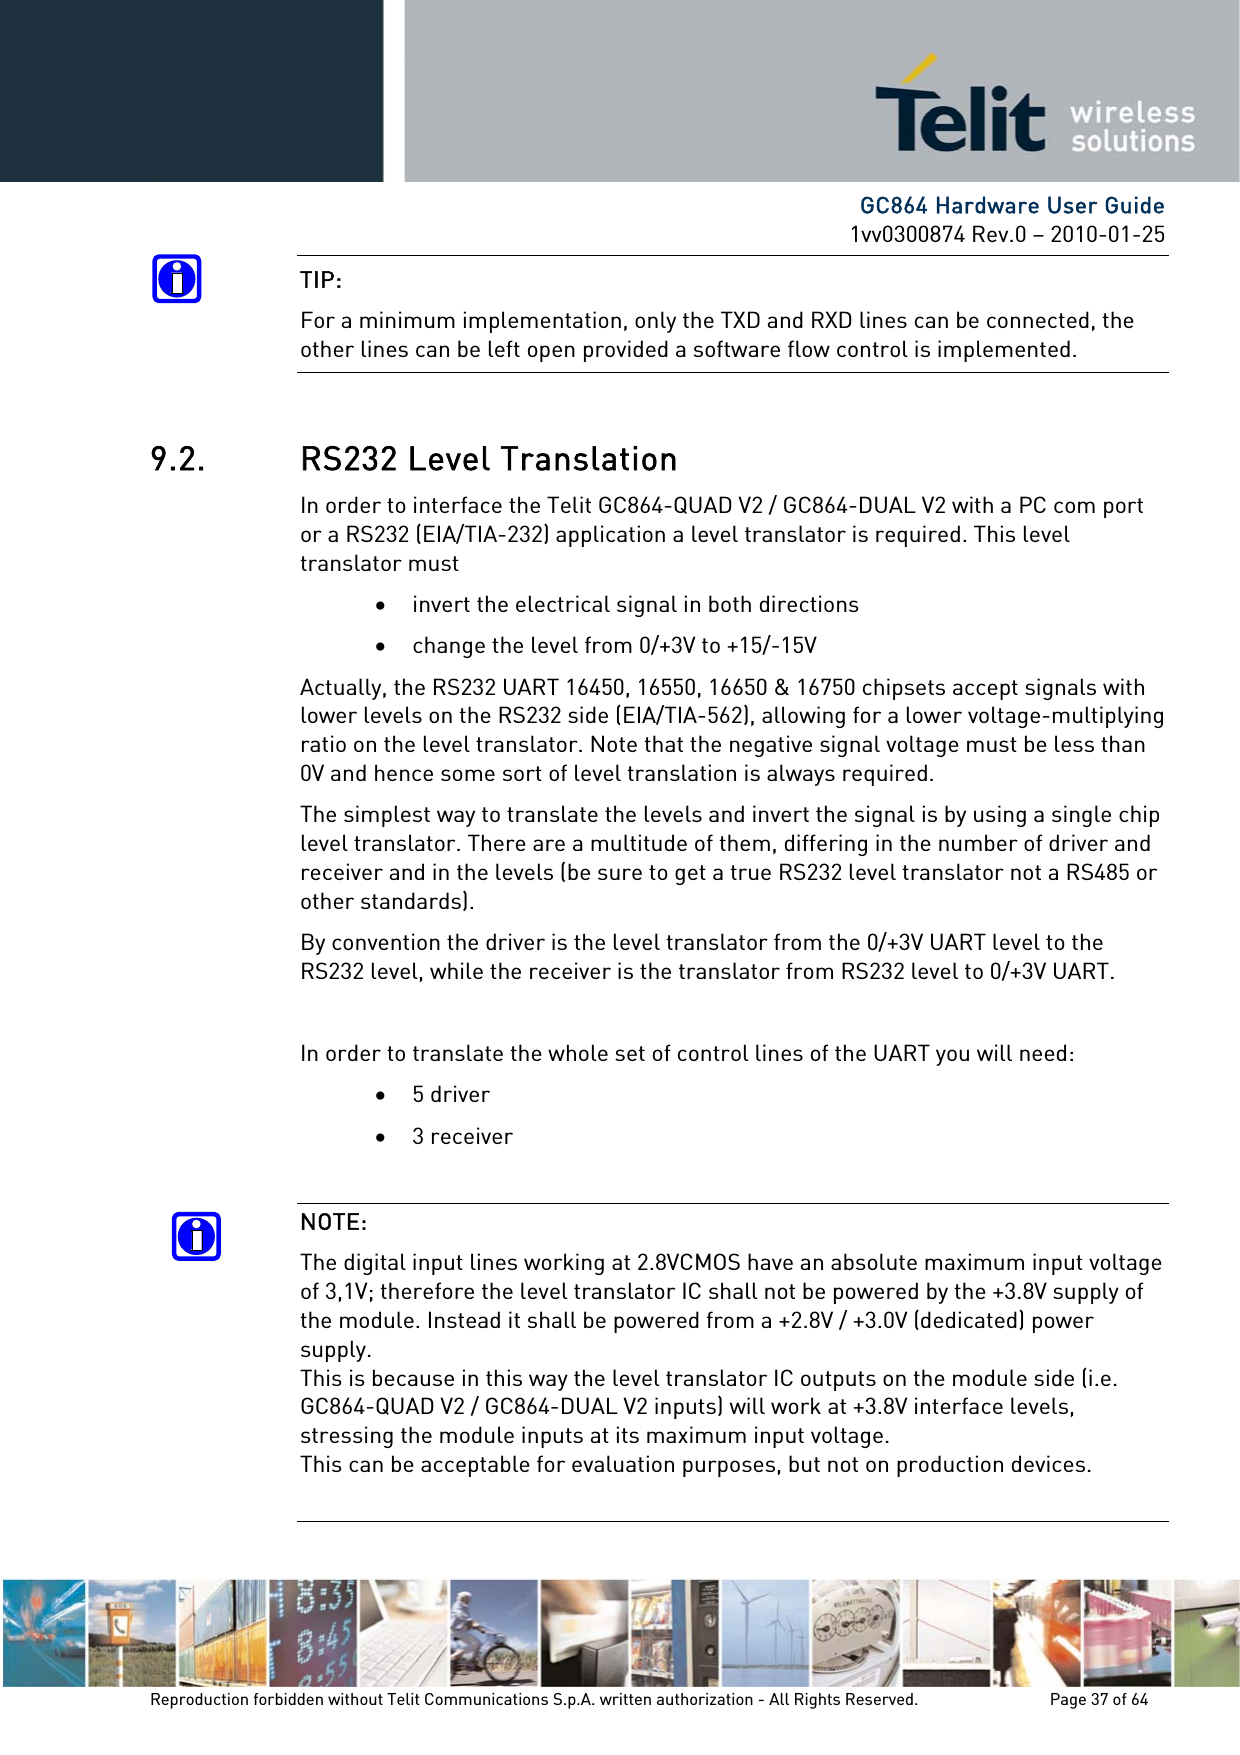      GC864 Hardware User Guide 1vv0300874 Rev.0 – 2010-01-25 Reproduction forbidden without Telit Communications S.p.A. written authorization - All Rights Reserved.    Page 37 of 64  TIP: For a minimum implementation, only the TXD and RXD lines can be connected, the other lines can be left open provided a software flow control is implemented.  9.2. RS232 Level Translation In order to interface the Telit GC864-QUAD V2 / GC864-DUAL V2 with a PC com port or a RS232 (EIA/TIA-232) application a level translator is required. This level translator must • invert the electrical signal in both directions • change the level from 0/+3V to +15/-15V Actually, the RS232 UART 16450, 16550, 16650 &amp; 16750 chipsets accept signals with lower levels on the RS232 side (EIA/TIA-562), allowing for a lower voltage-multiplying ratio on the level translator. Note that the negative signal voltage must be less than 0V and hence some sort of level translation is always required.  The simplest way to translate the levels and invert the signal is by using a single chip level translator. There are a multitude of them, differing in the number of driver and receiver and in the levels (be sure to get a true RS232 level translator not a RS485 or other standards). By convention the driver is the level translator from the 0/+3V UART level to the RS232 level, while the receiver is the translator from RS232 level to 0/+3V UART.  In order to translate the whole set of control lines of the UART you will need: • 5 driver • 3 receiver  NOTE: The digital input lines working at 2.8VCMOS have an absolute maximum input voltage of 3,1V; therefore the level translator IC shall not be powered by the +3.8V supply of the module. Instead it shall be powered from a +2.8V / +3.0V (dedicated) power supply. This is because in this way the level translator IC outputs on the module side (i.e.  GC864-QUAD V2 / GC864-DUAL V2 inputs) will work at +3.8V interface levels, stressing the module inputs at its maximum input voltage. This can be acceptable for evaluation purposes, but not on production devices.  